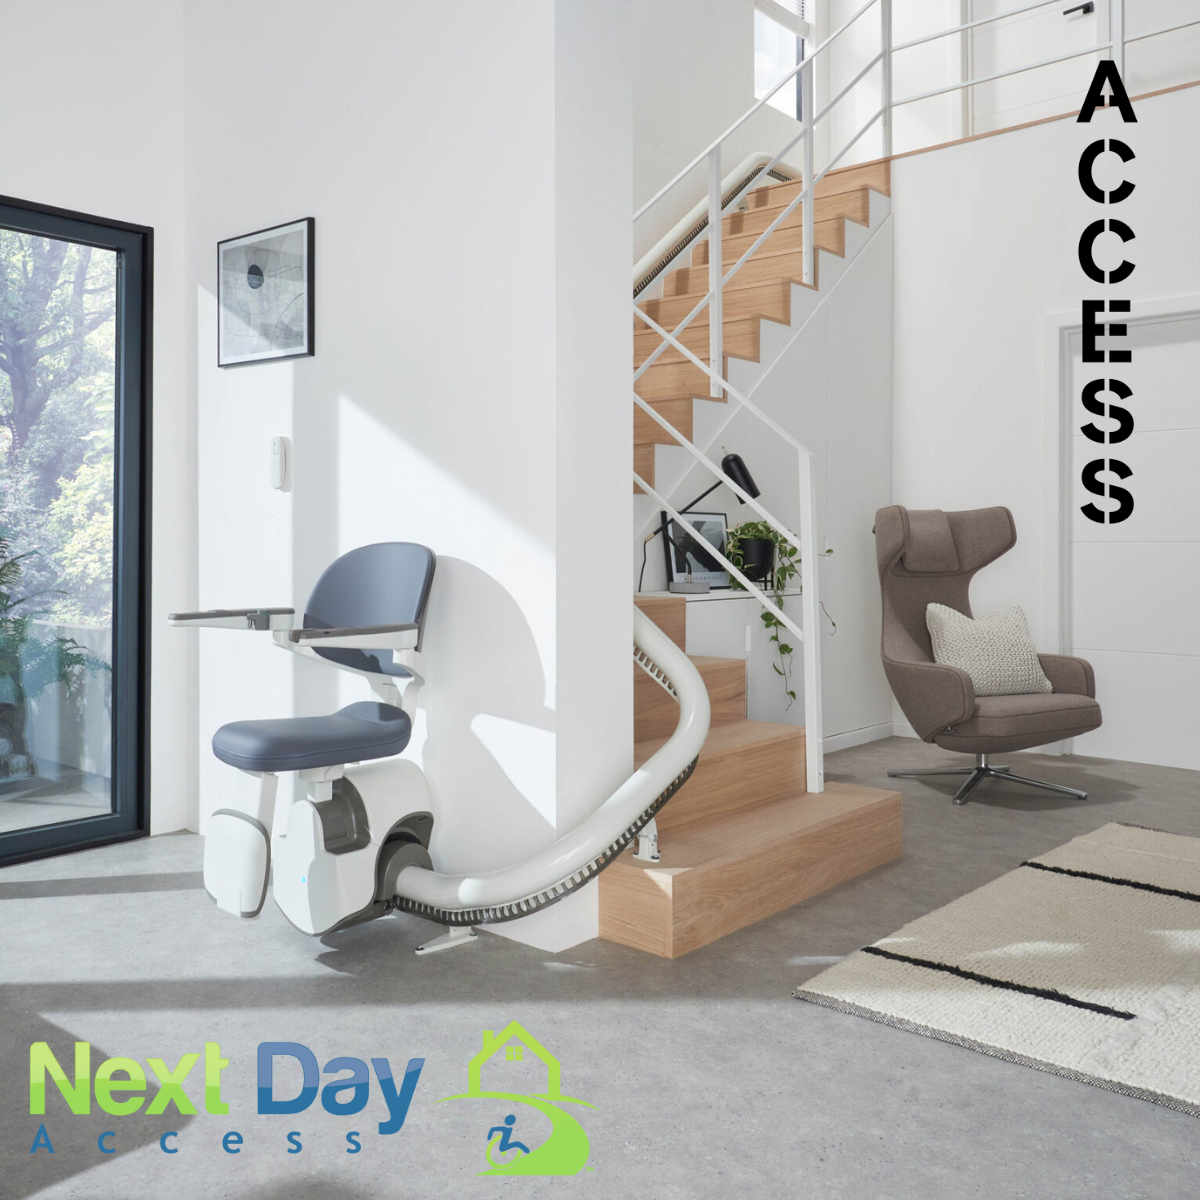 Next Day Access Partners with Access BDD